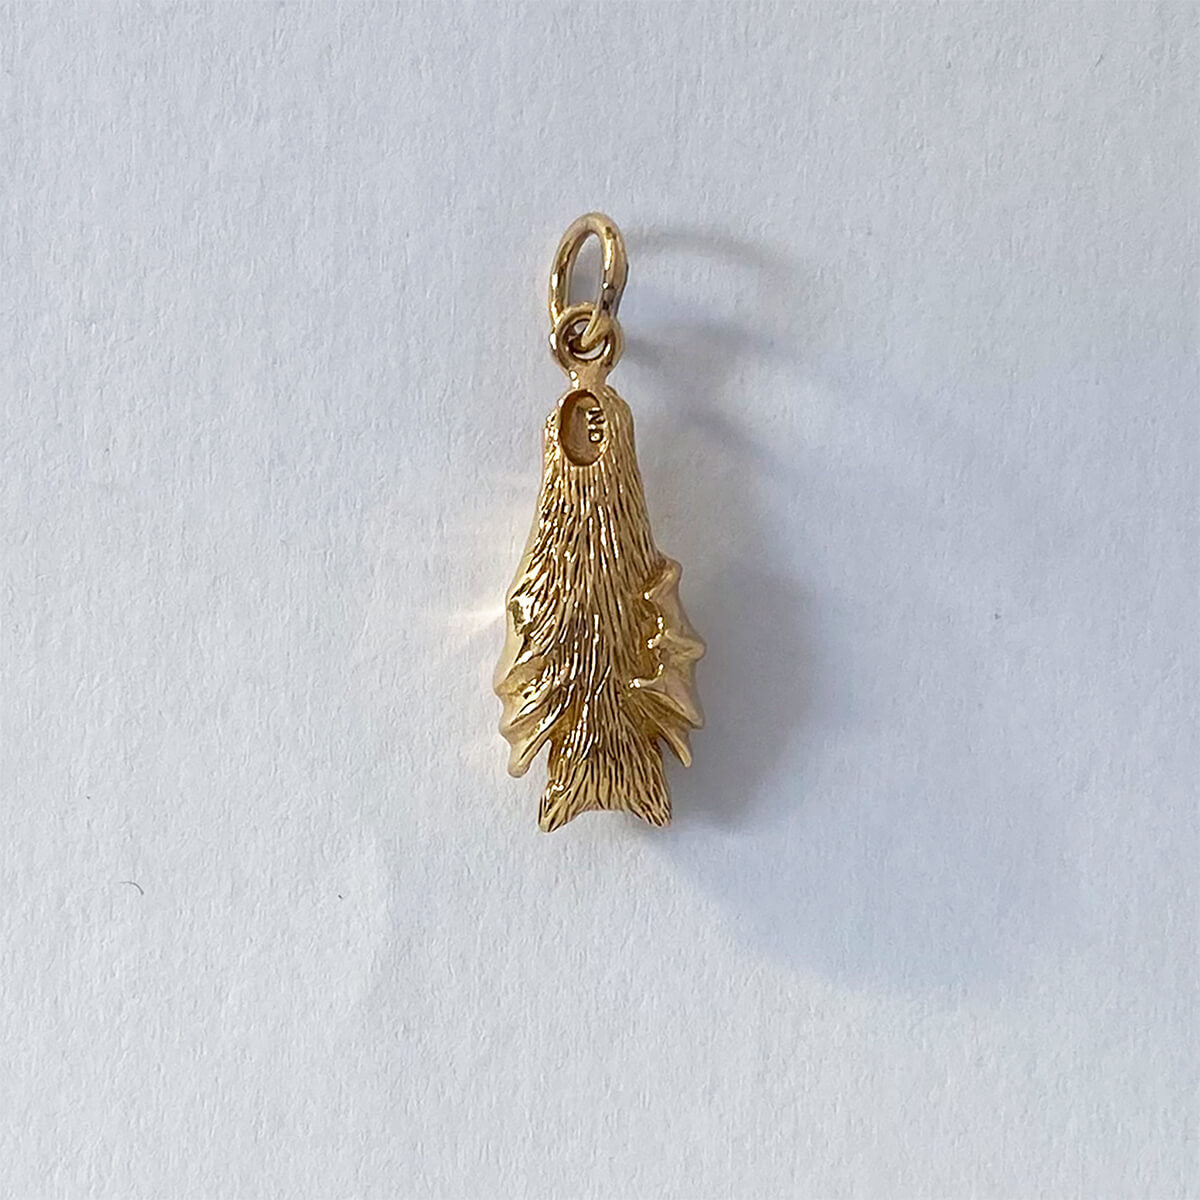 Bat charm in gold bronze hanging with wings folded pendant